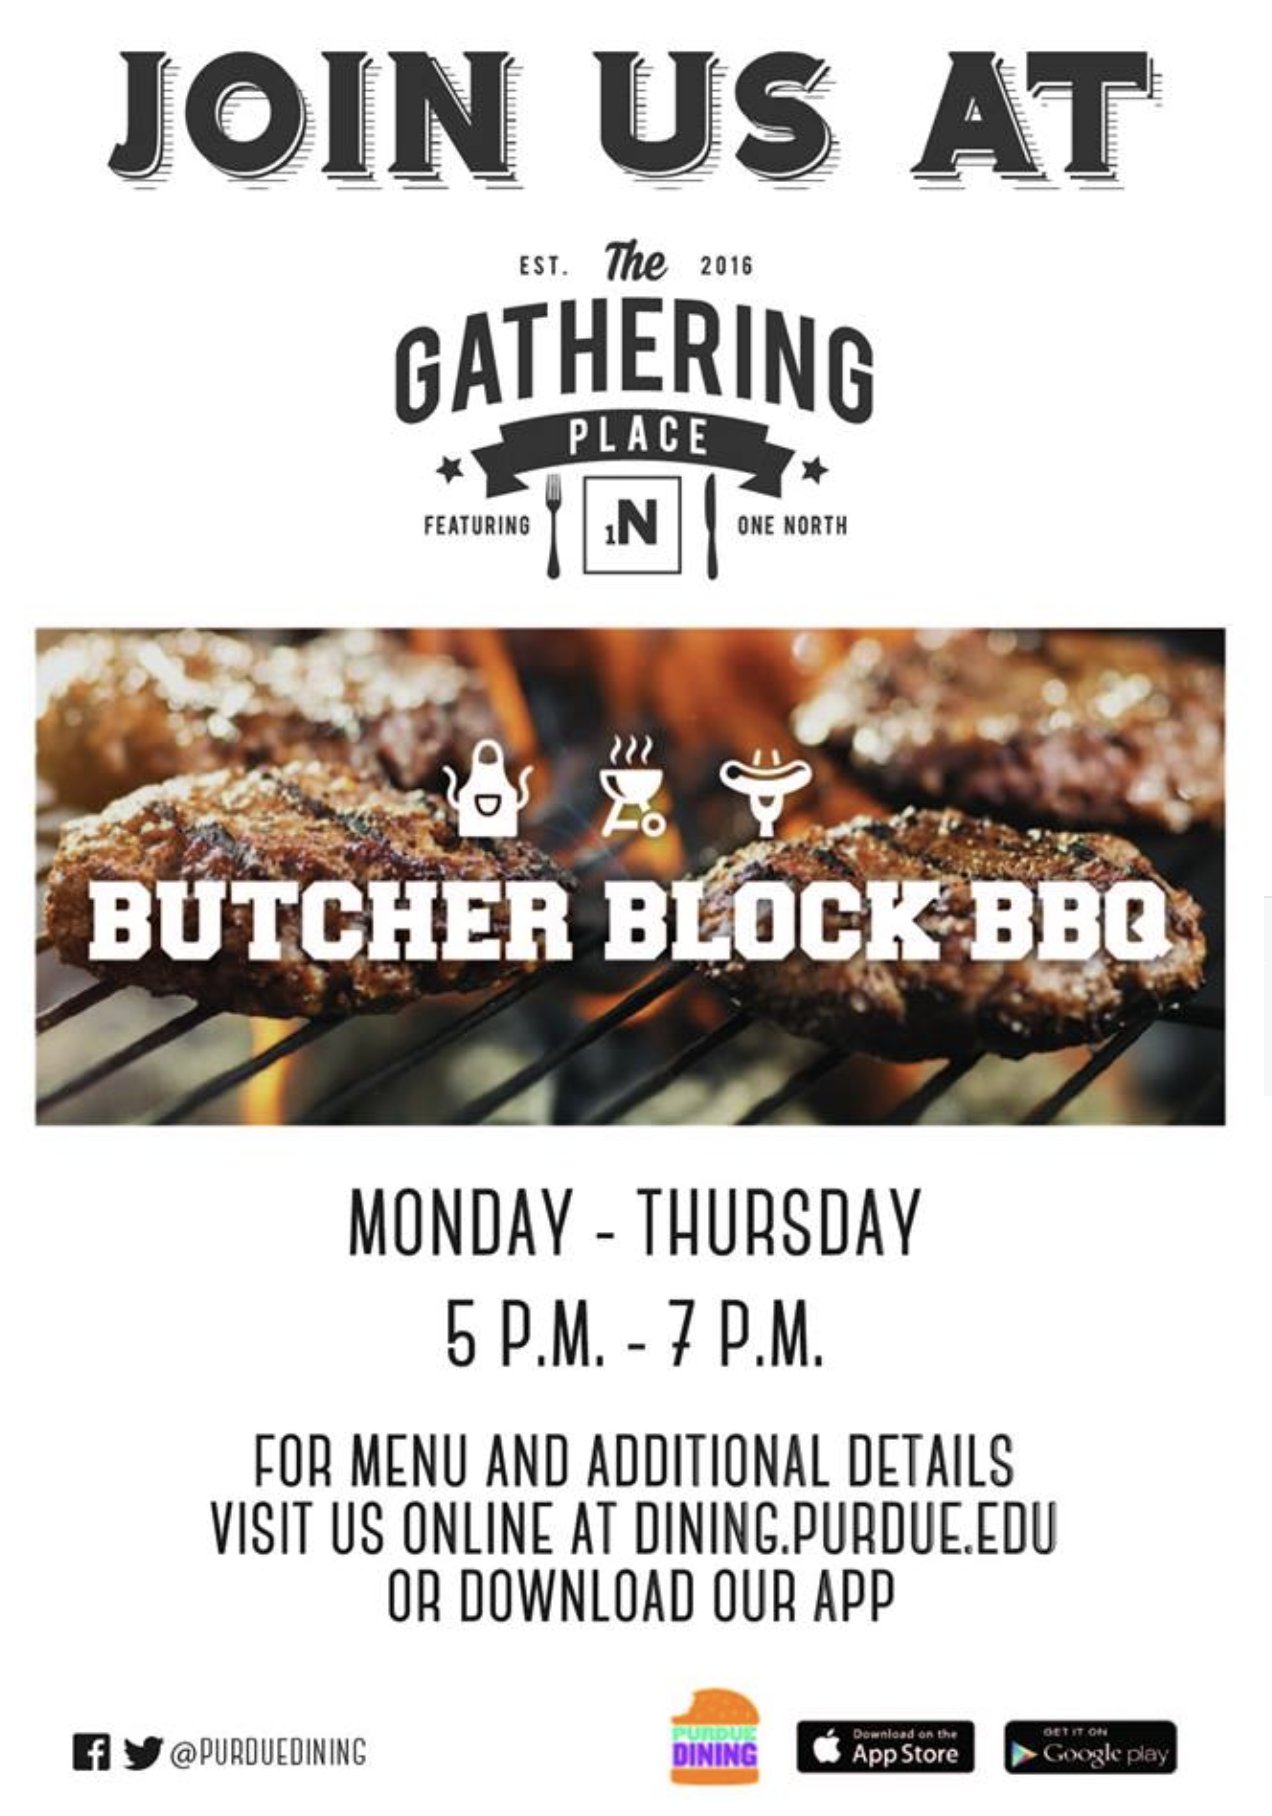 Download our app! Our new app is - The Butcher's Block